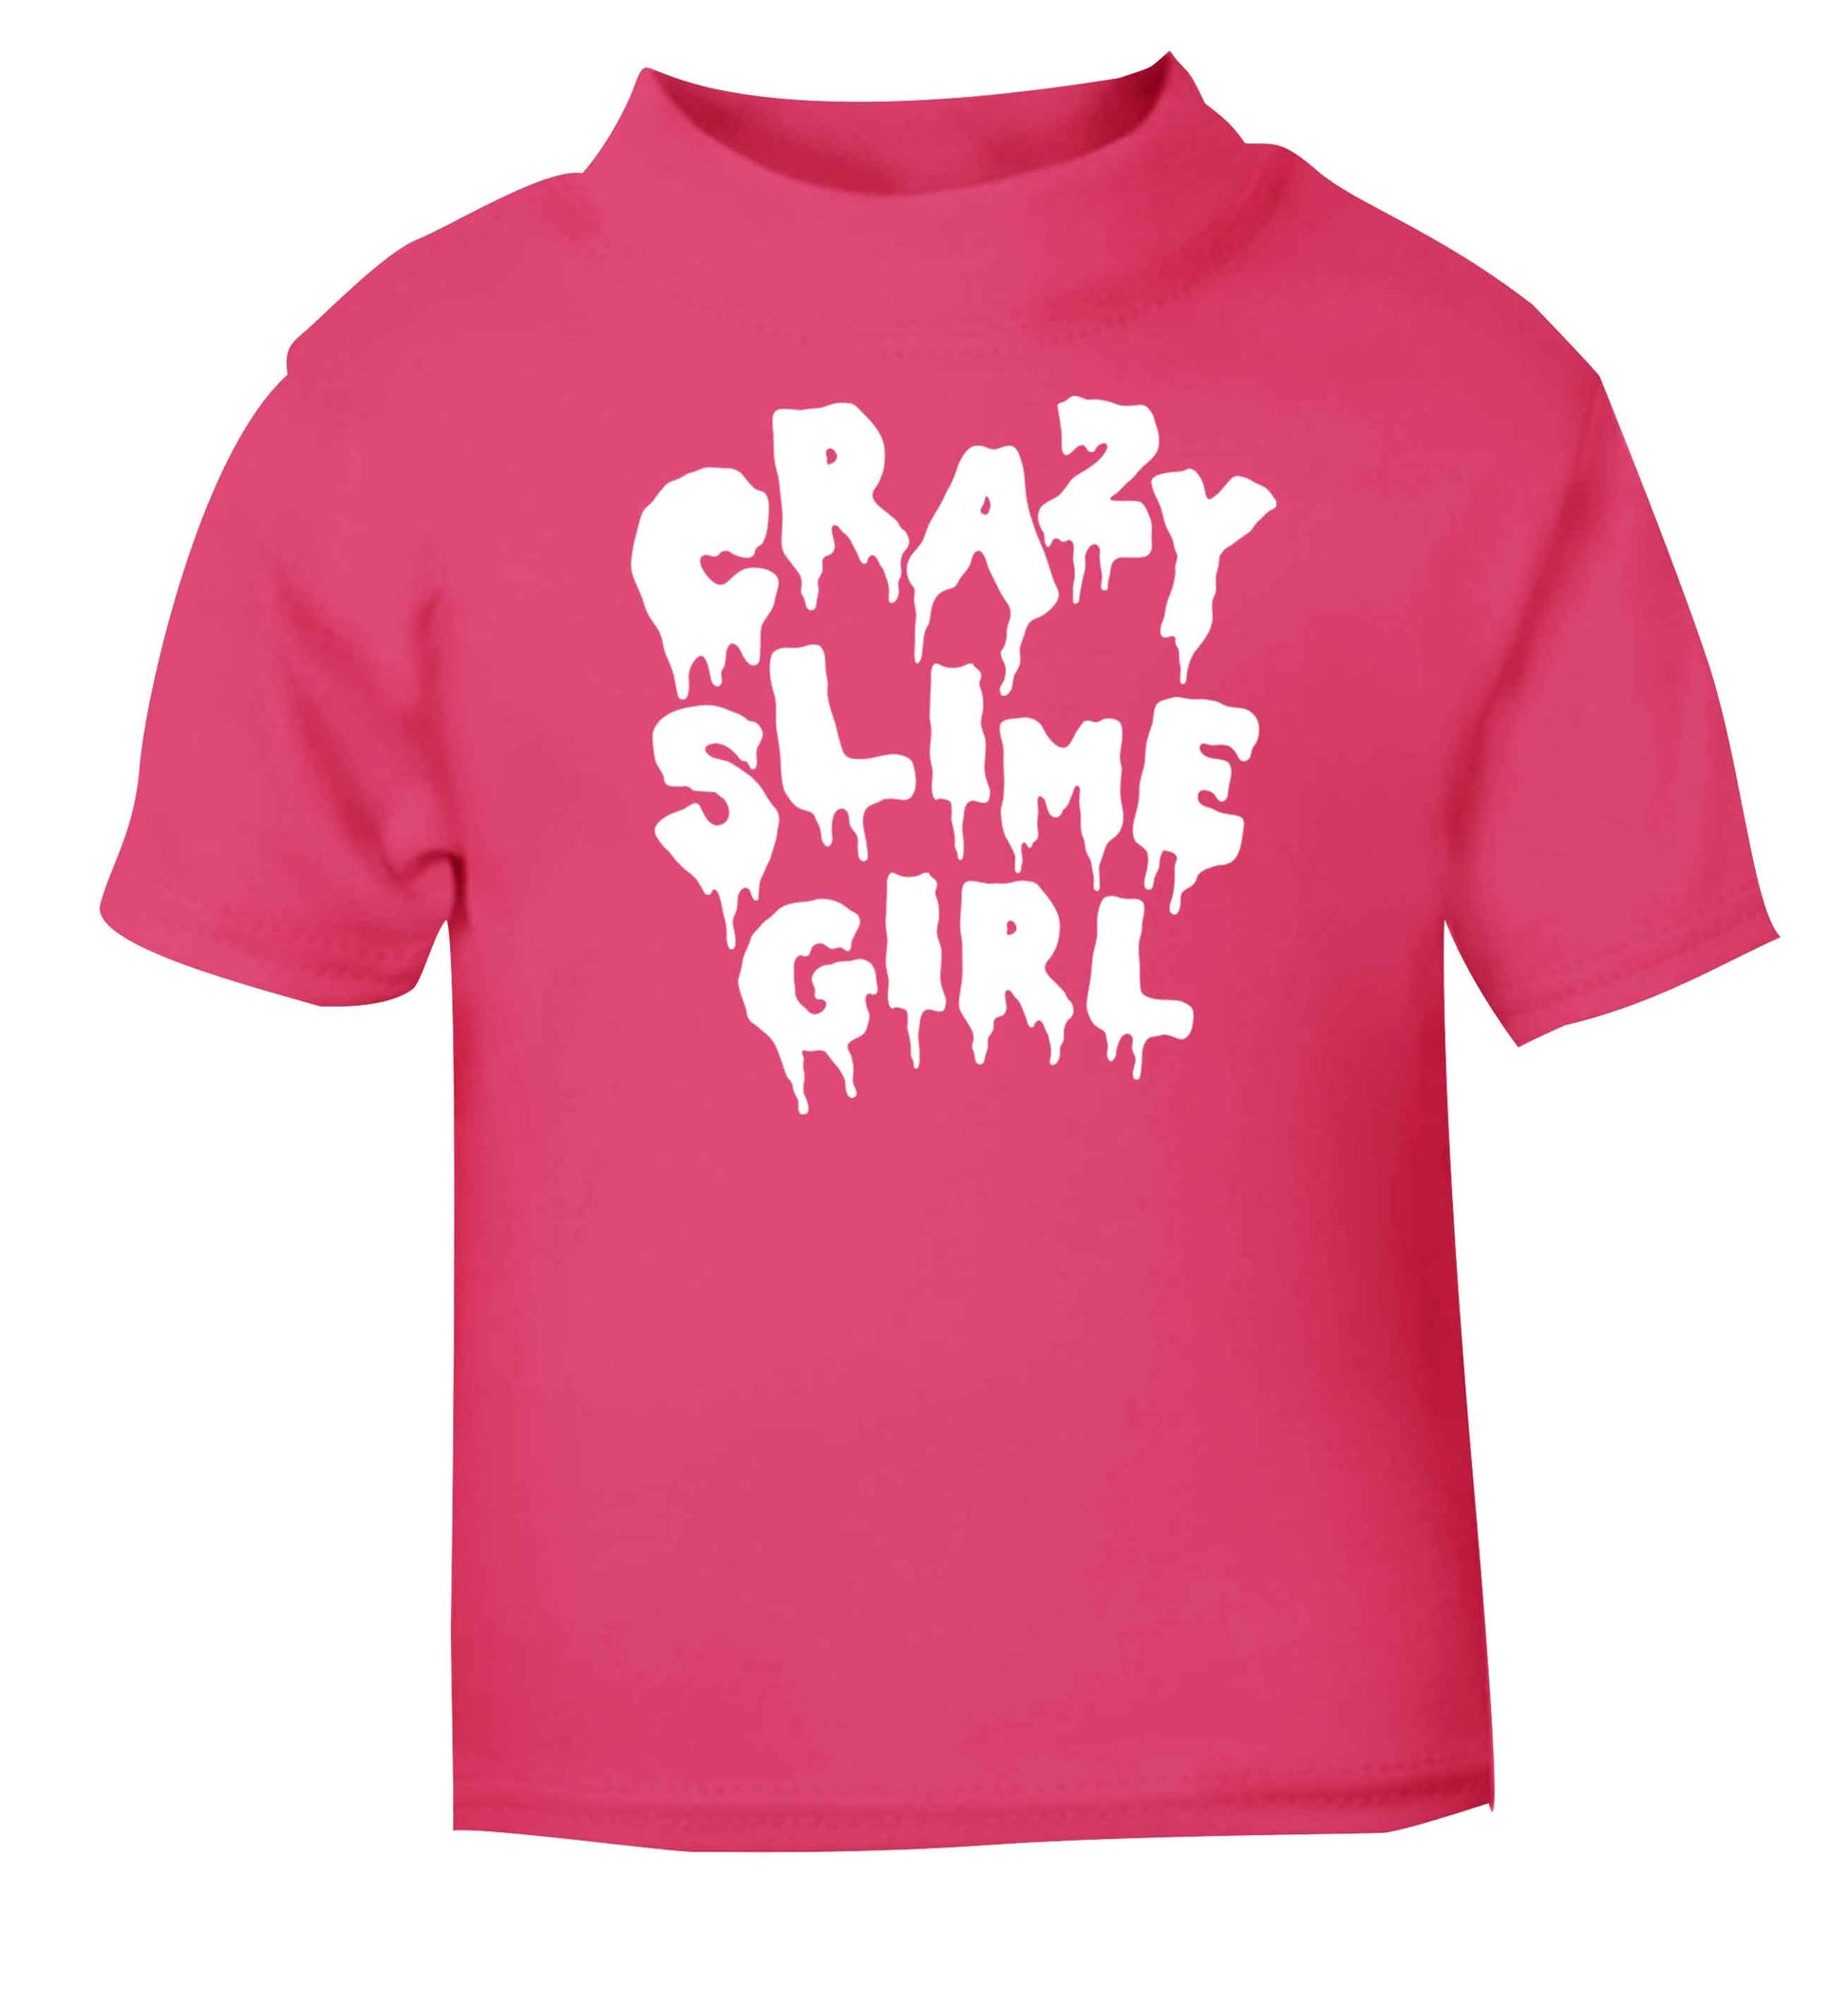 Crazy slime girl pink baby toddler Tshirt 2 Years